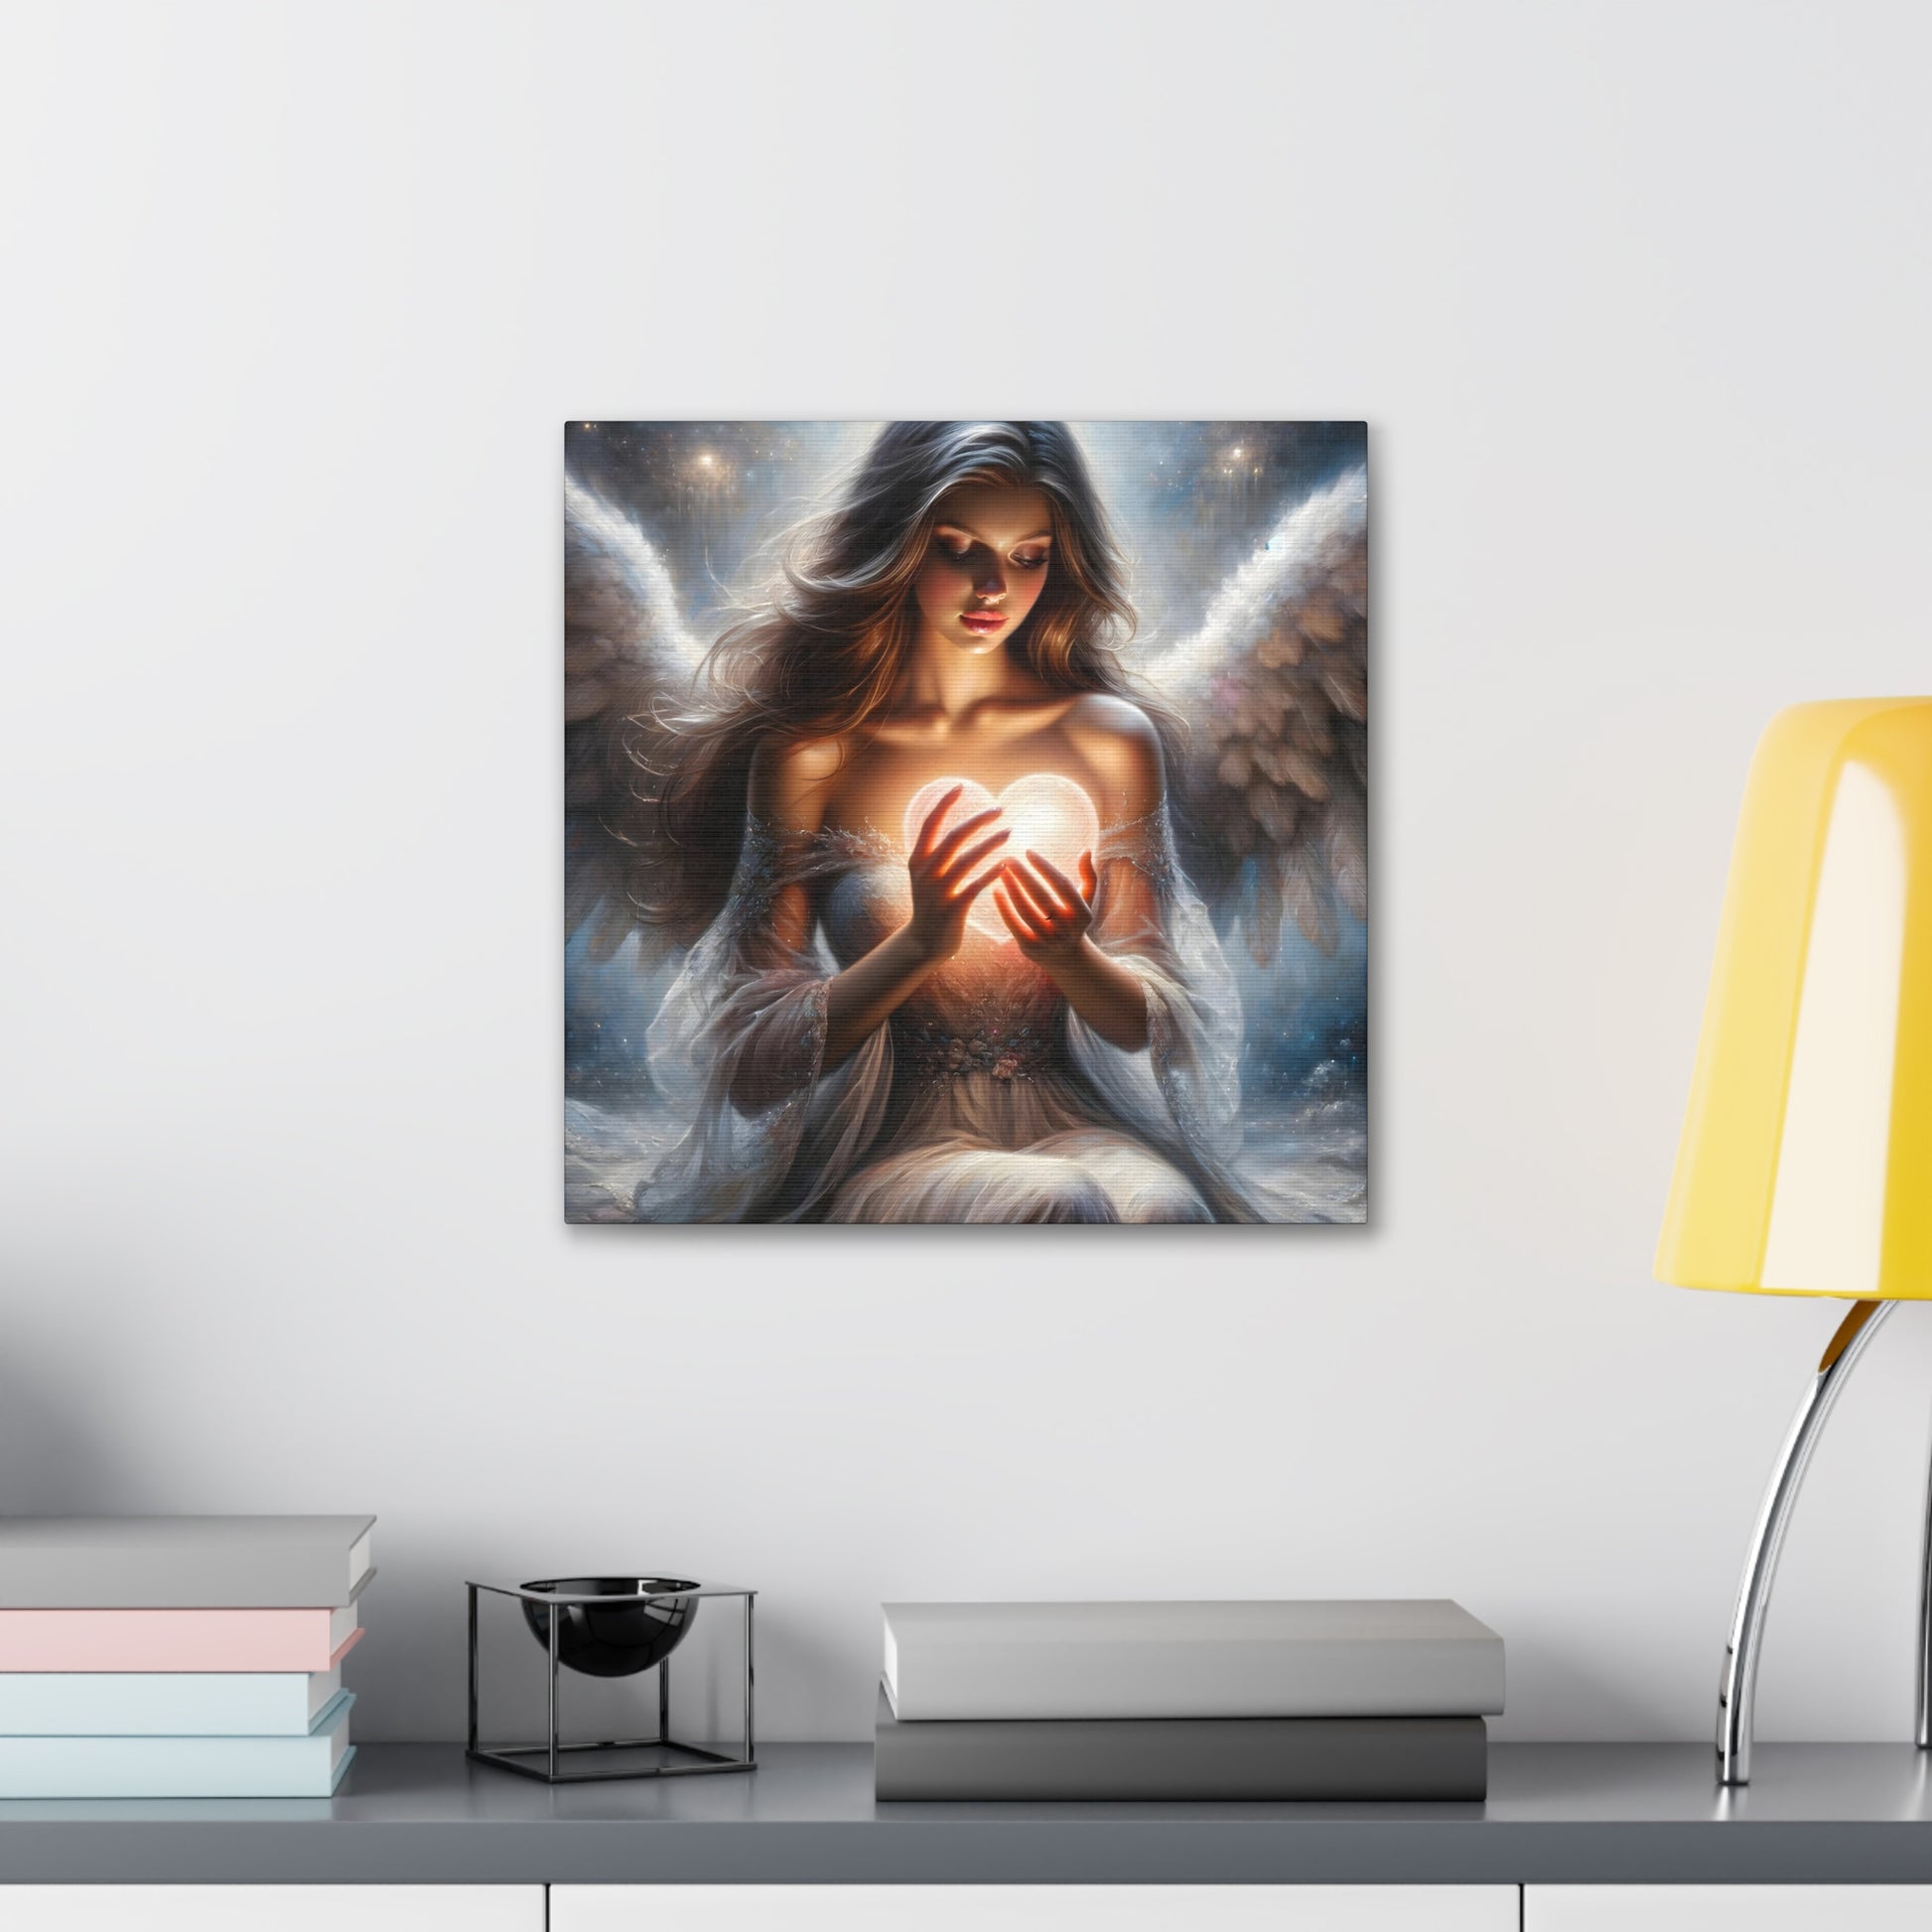 in situ Celestial Embrace' canvas wall art by Aurora, featuring an angelic being cradling a glowing heart to symbolize the purity and passion of love. The artwork is rich in ethereal details and luminescent tones, creating a serene yet powerful ambiance, ideal for those who love heavenly-inspired decor with a romantic touch.